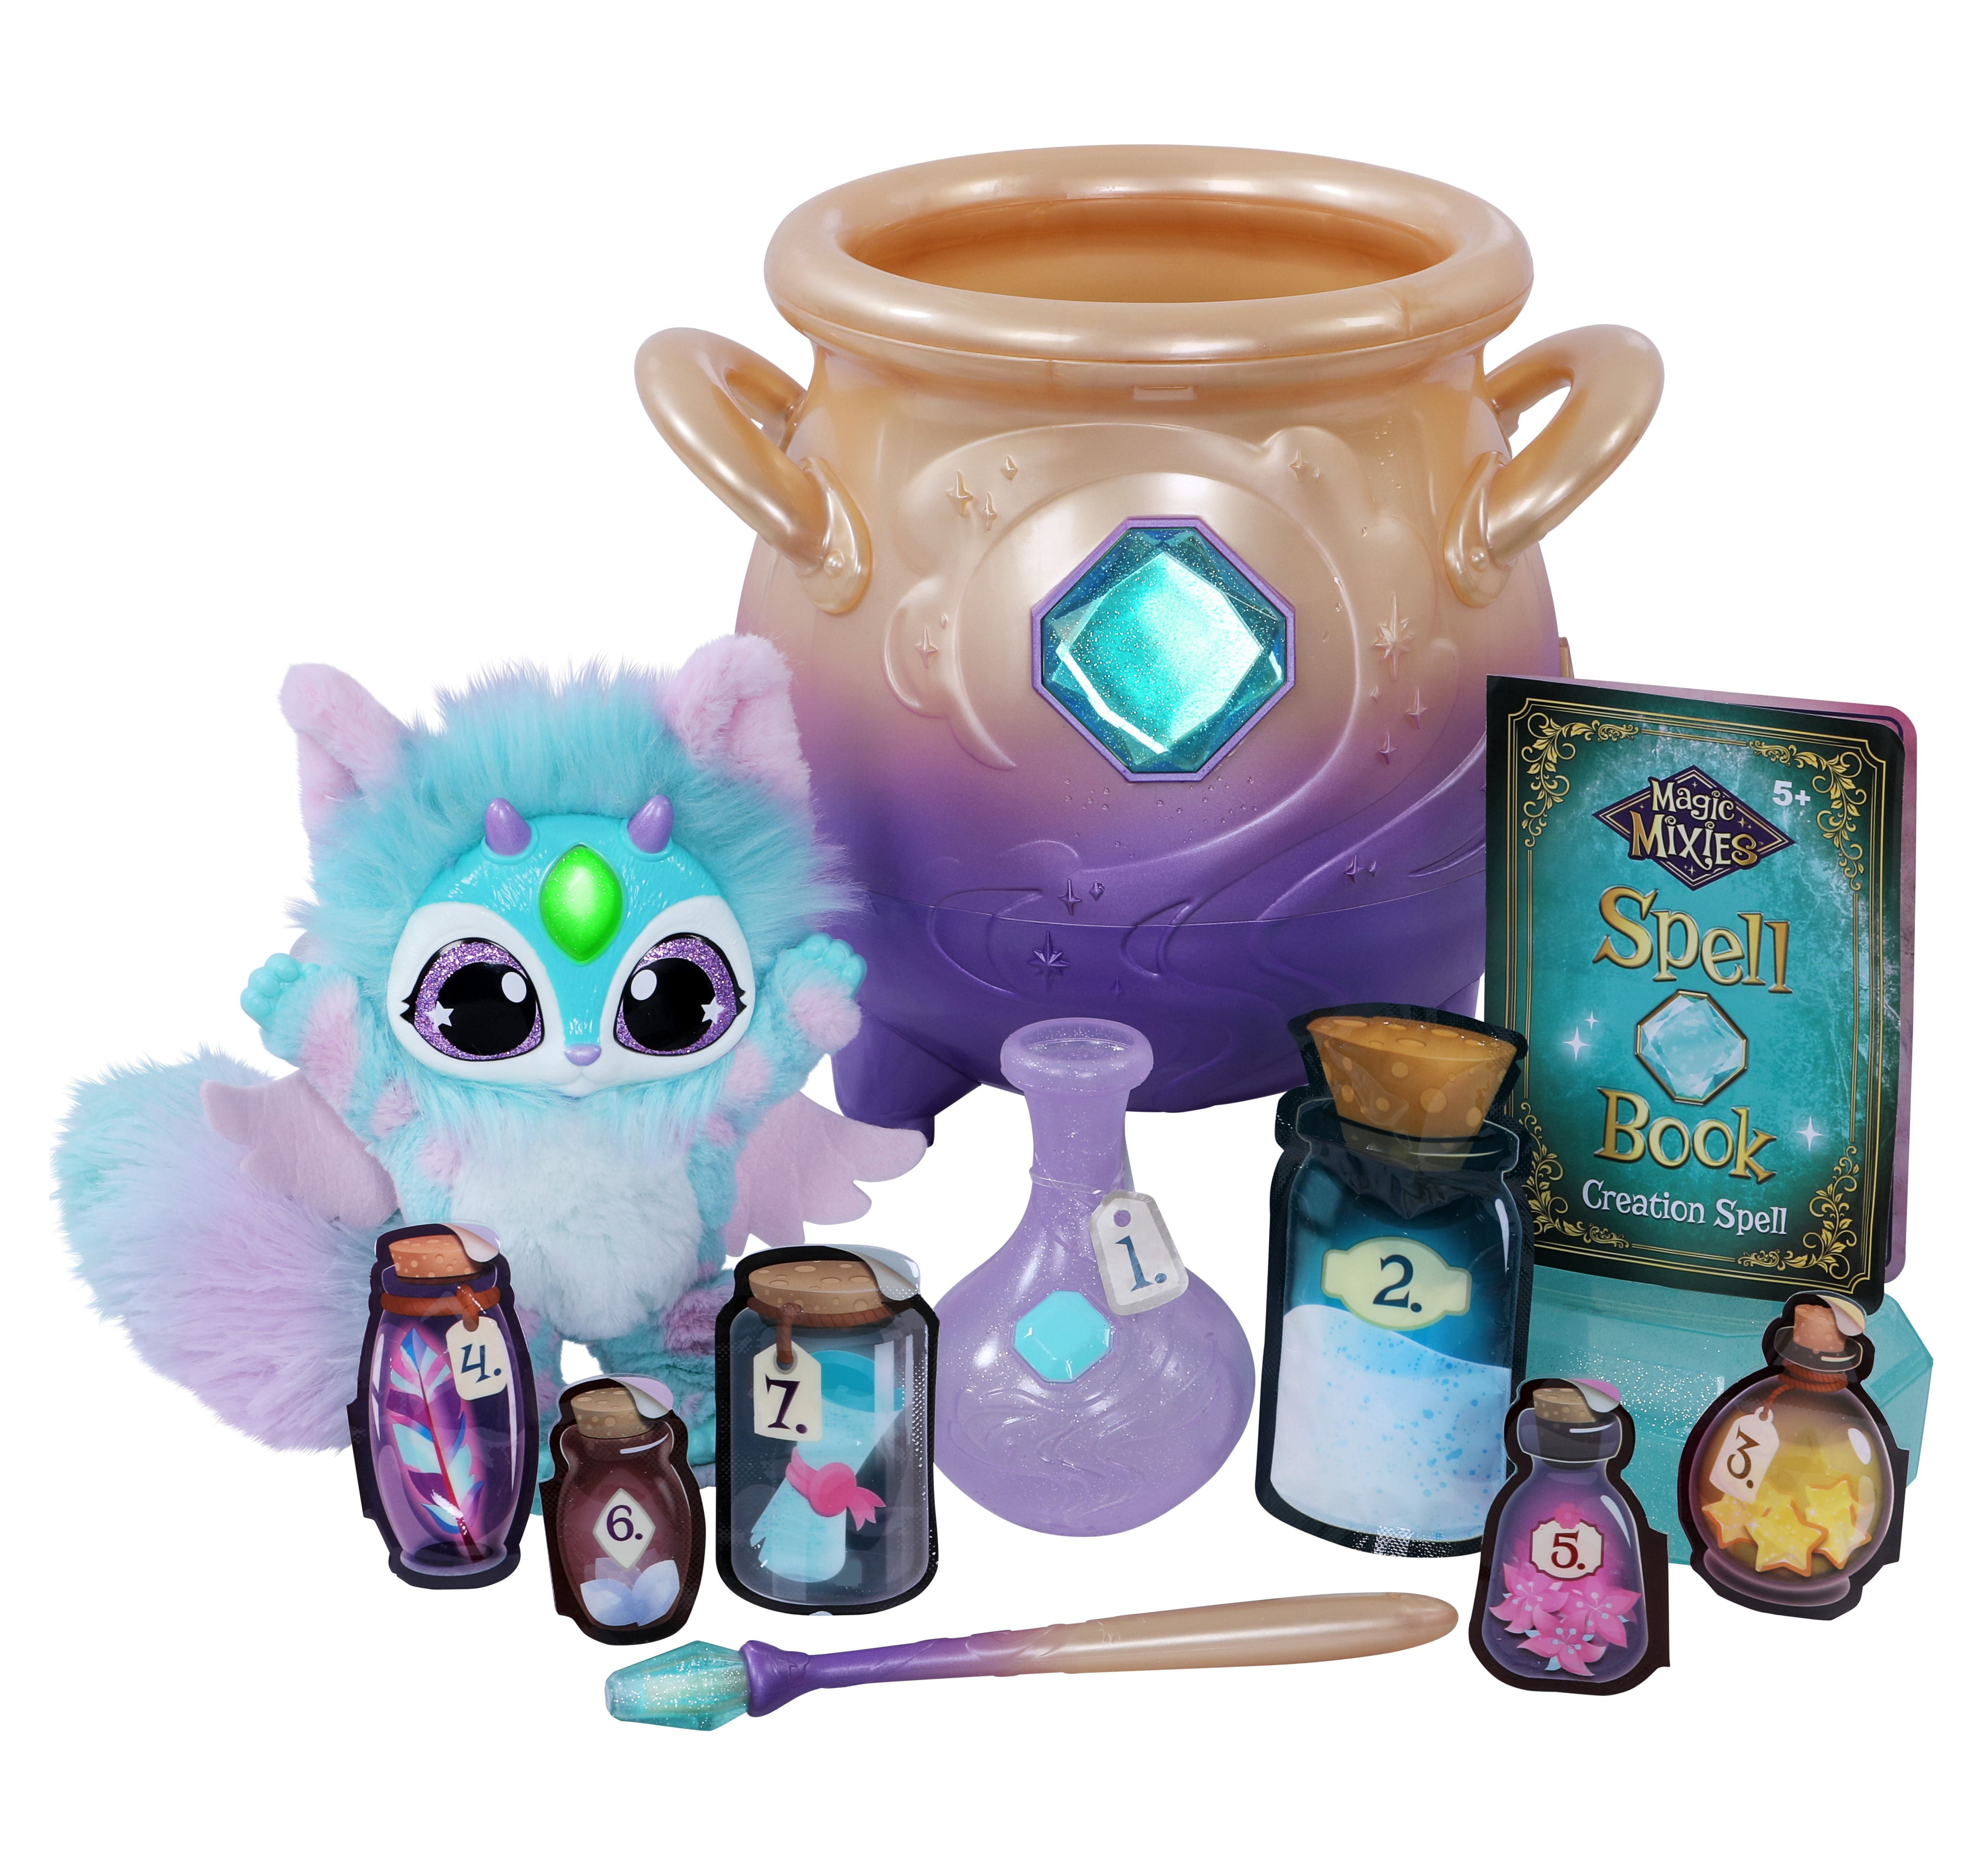 Toys　Ages　Sounds　Toy　and　Magical　Kids,　Misting　Plush　for　50+　Reactions,　Mixies　with　Interactive　and　Blue　inch　Cauldron　Magic　5+